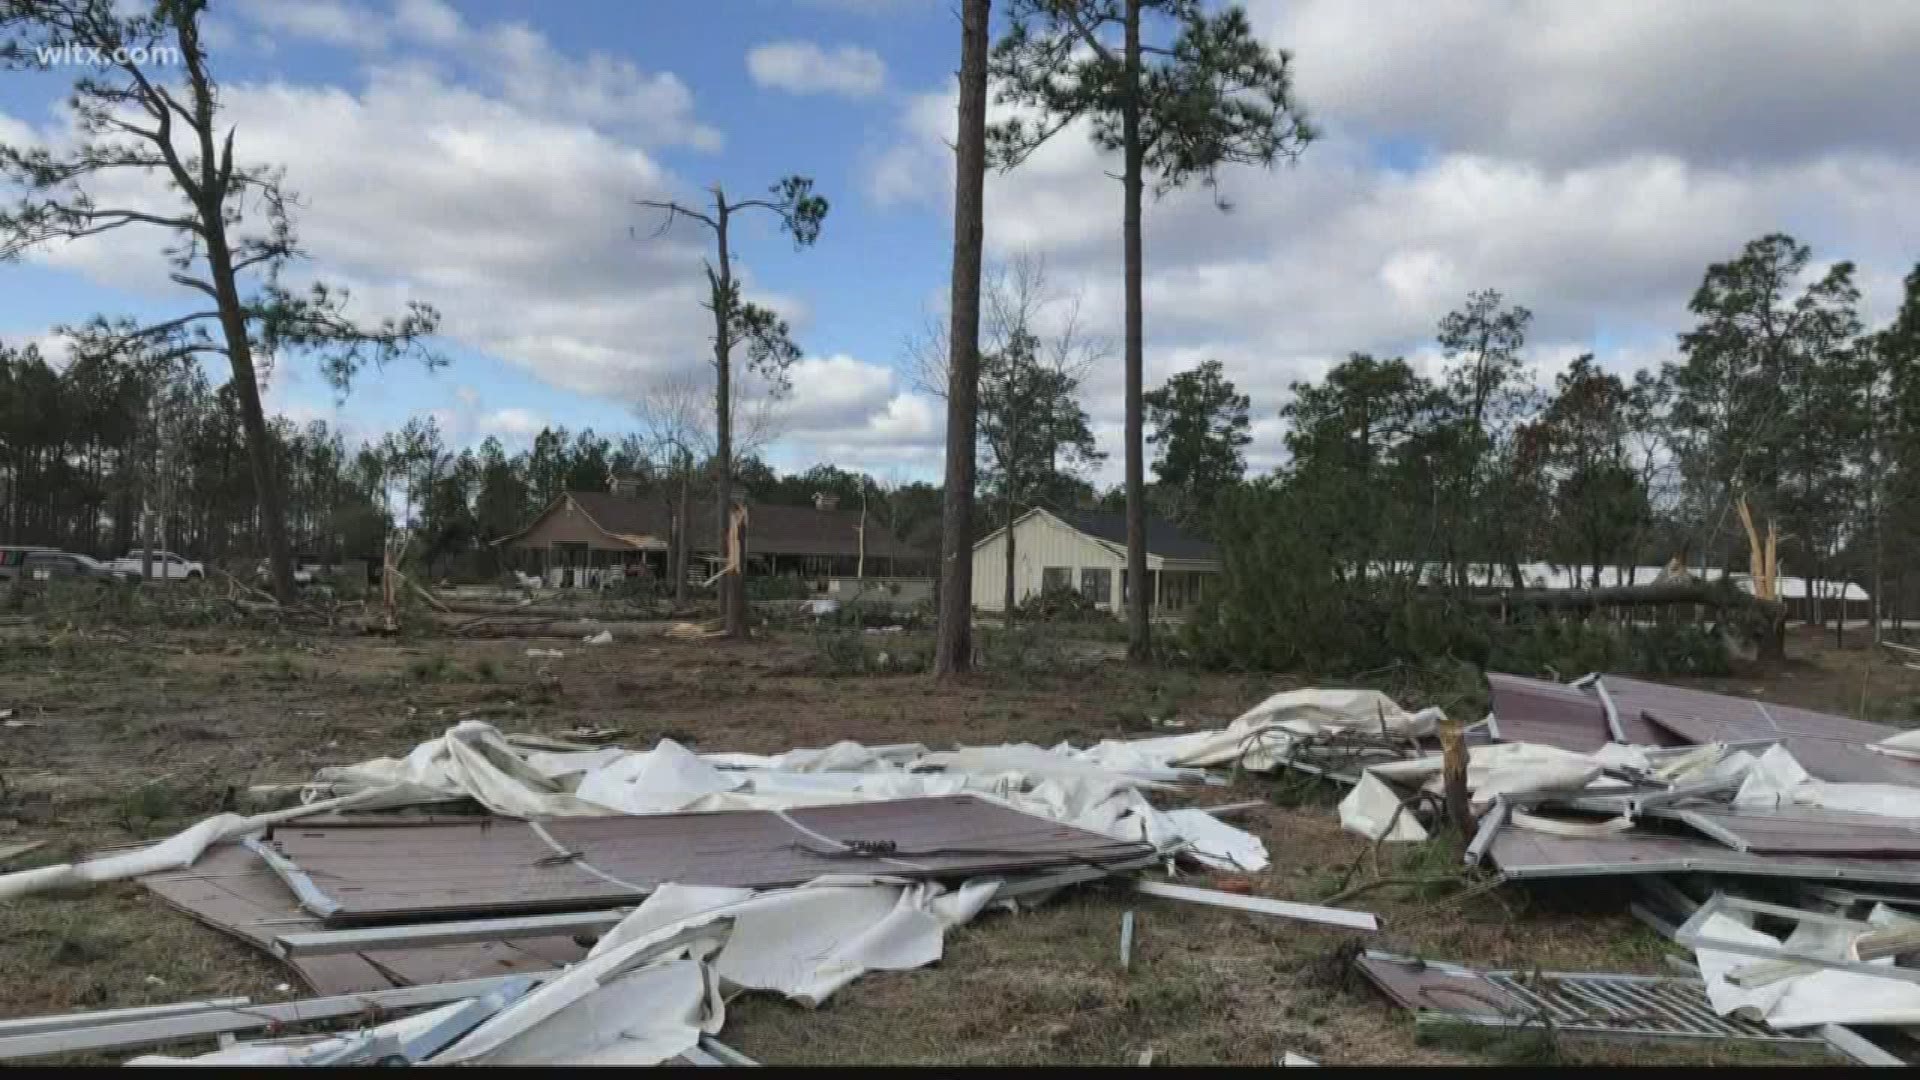 There were two tornadoes and plenty of other damage caused by the storms that moved in Thursday into Friday.